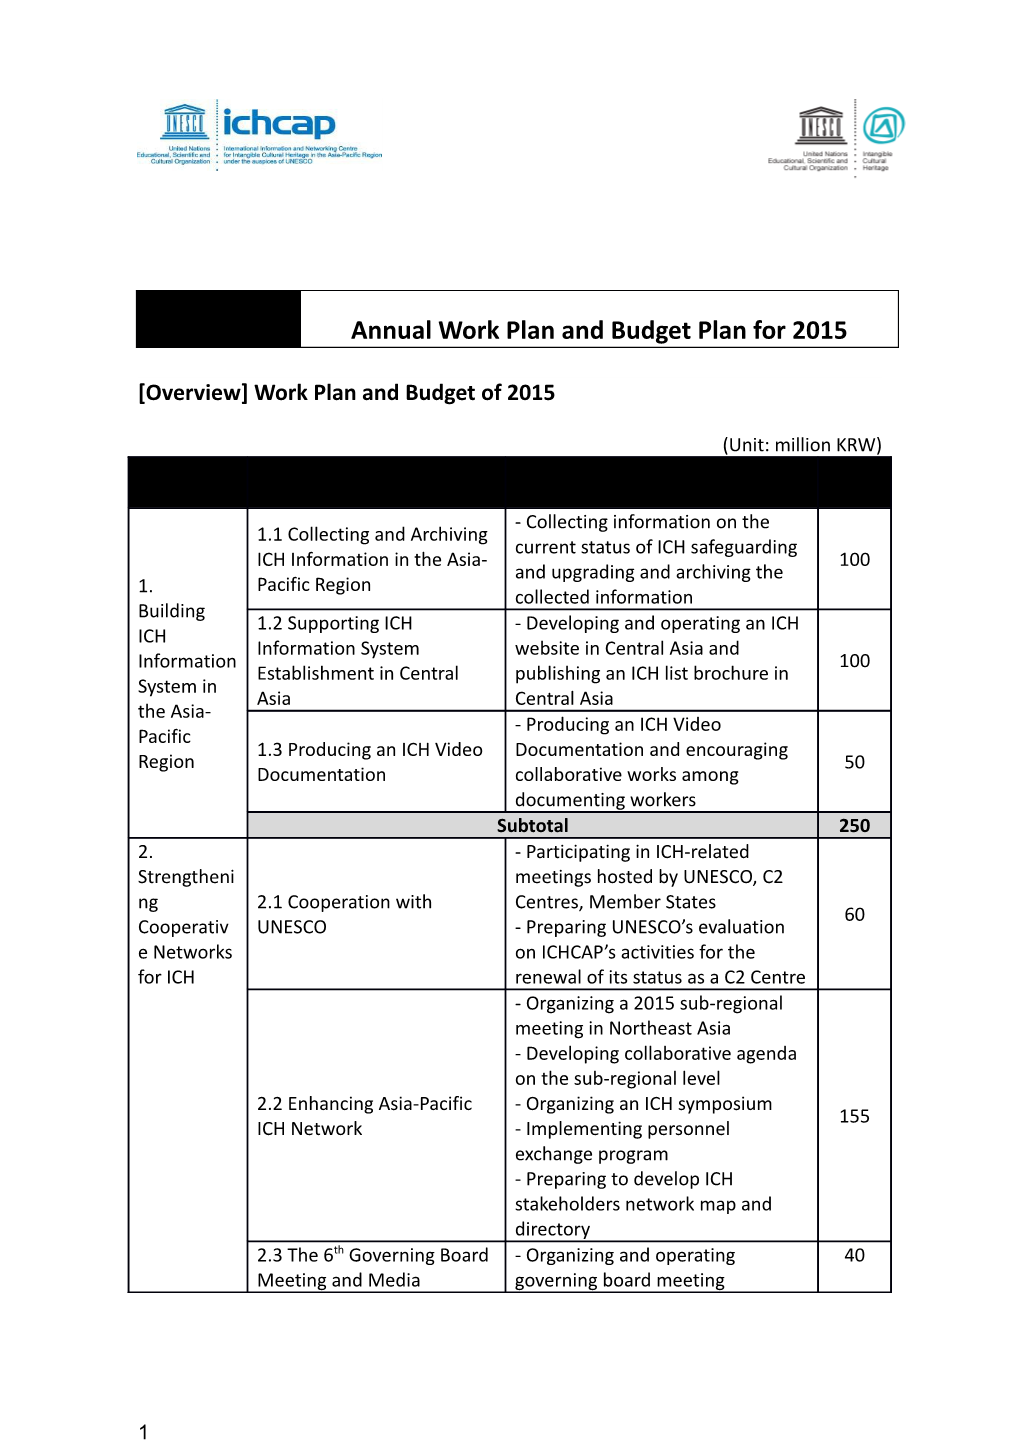 Overview Work Plan and Budget of 2015